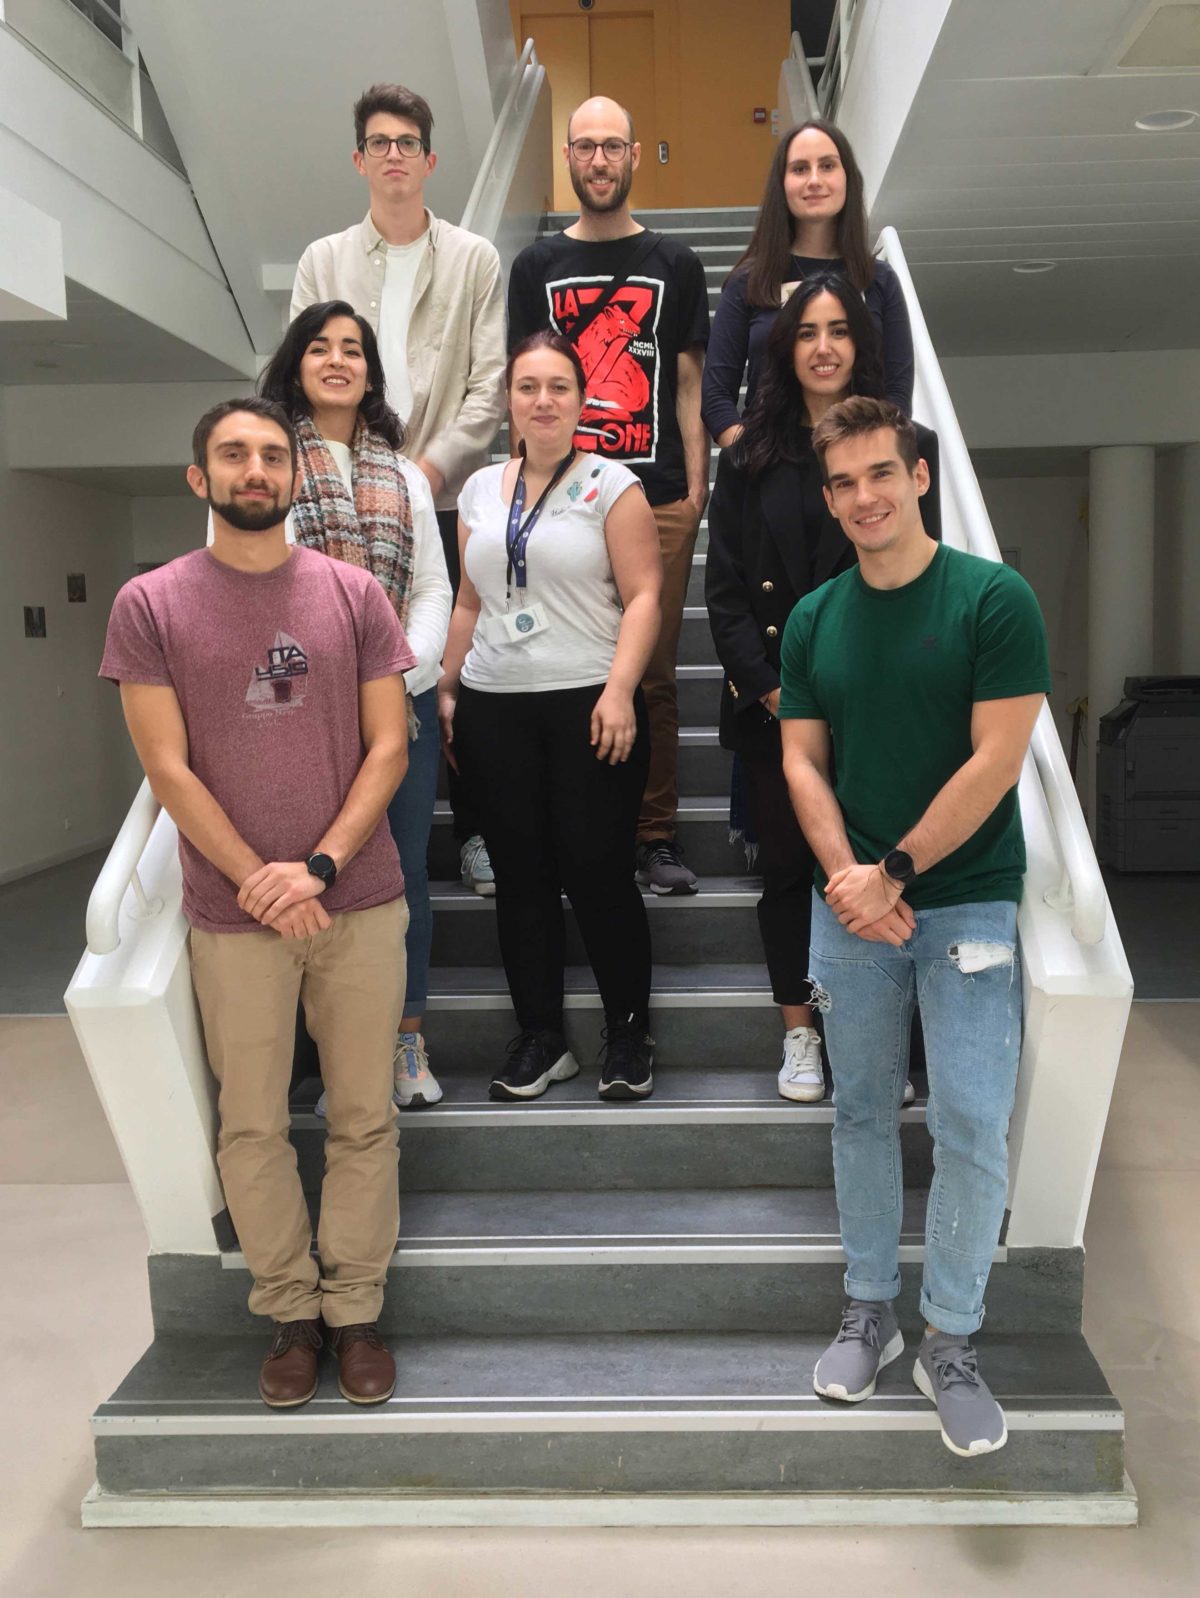 Welcome to the 9 PhD students of the 2022-2023 class!